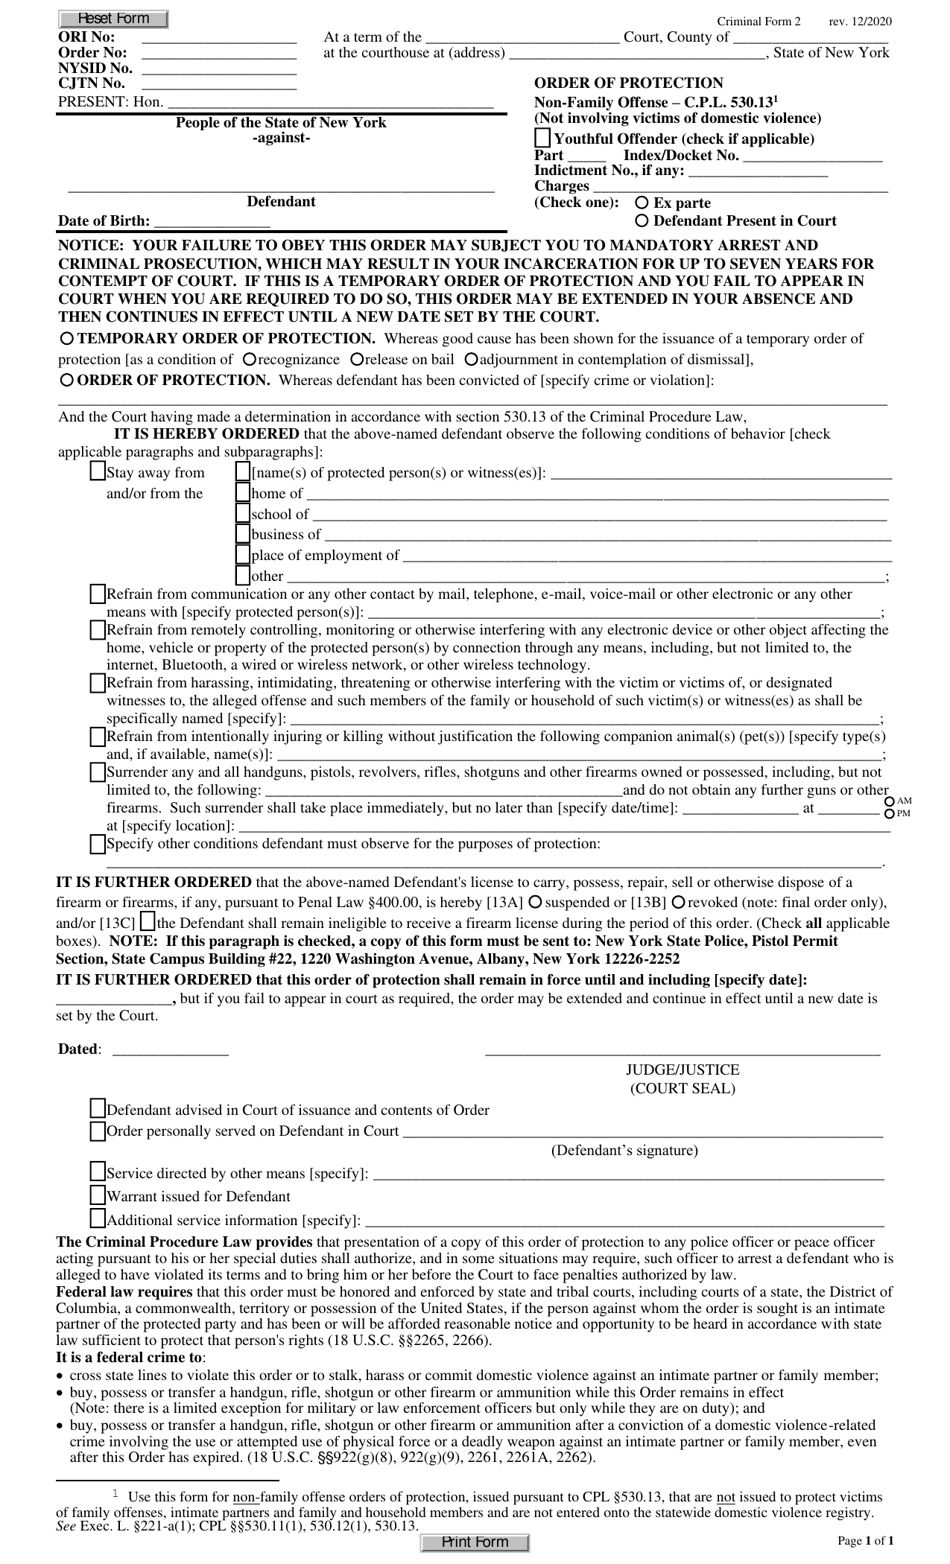 Criminal Form 2 Order of Protection - Non-family Offense - New York, Page 1